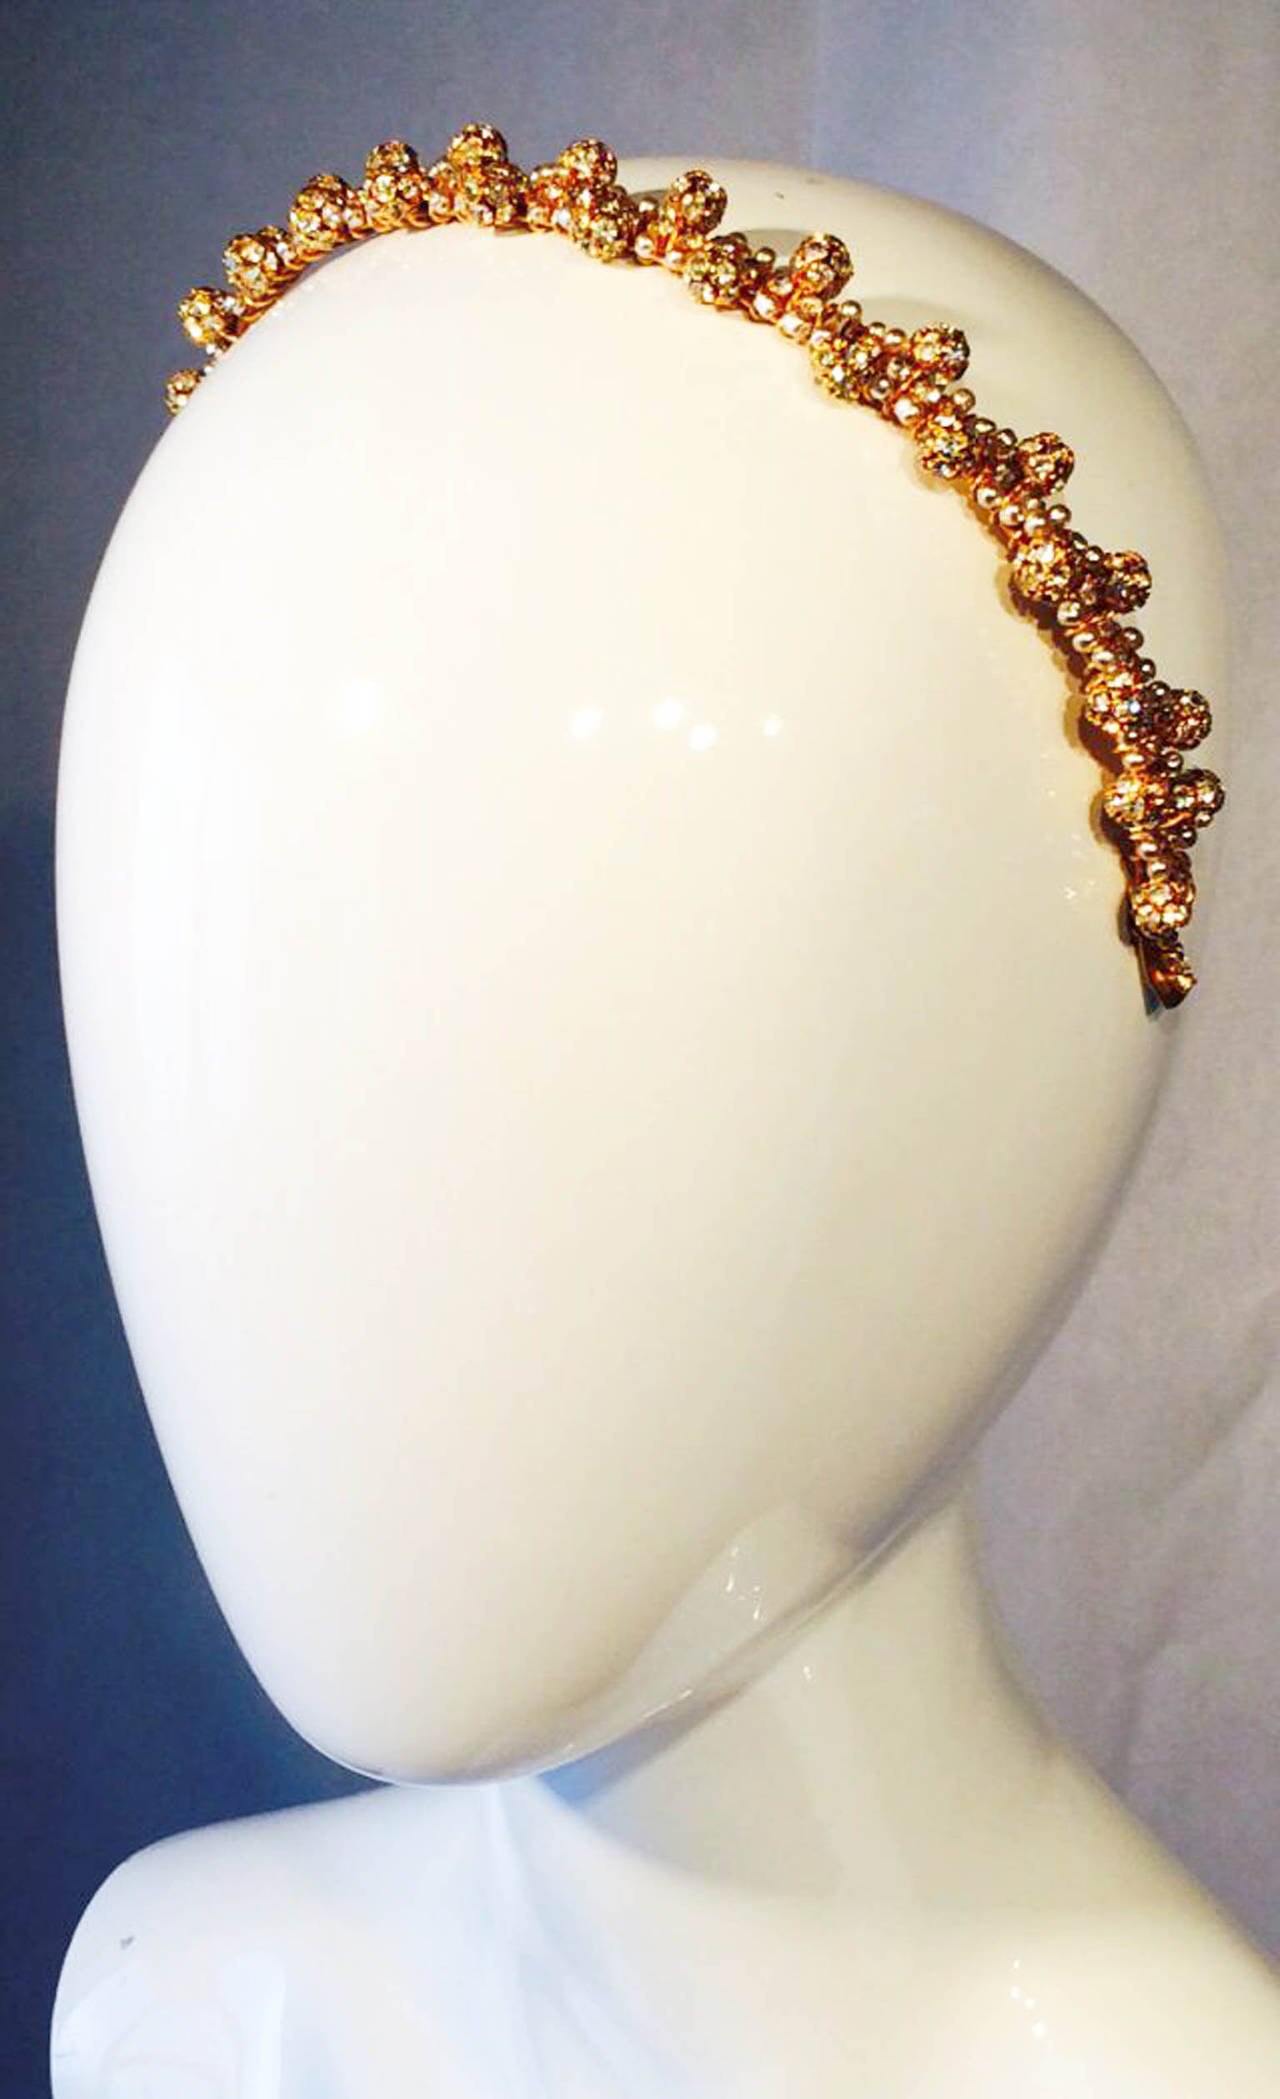 A fine vintage William de Lillo 'jeweled' head band. Signed gilt metal item features hand wired and set crystals and faux pearls. Non-produced one-off sample item from the Wm de Lillo archives. Unworn.